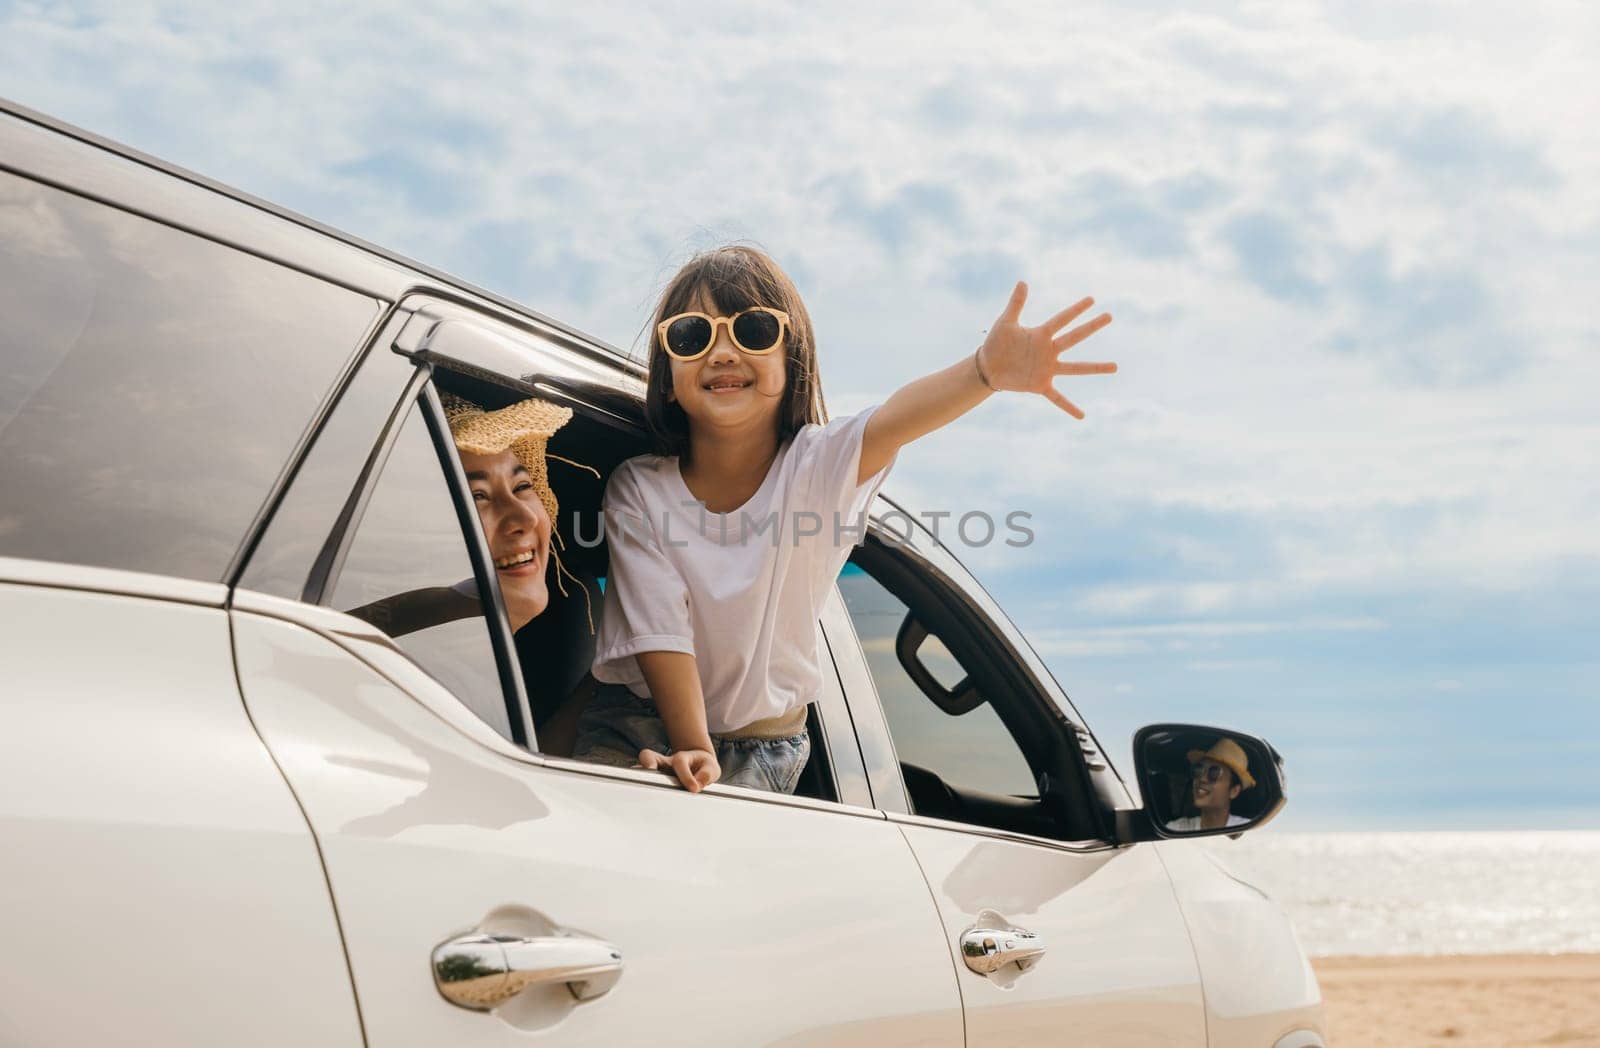 Happy family day. Asian Dad, mom and daughter little kid smiling sitting in compact car windows raise hand wave goodbye, Summer at beach, Car insurance, Family holiday vacation travel, road trip